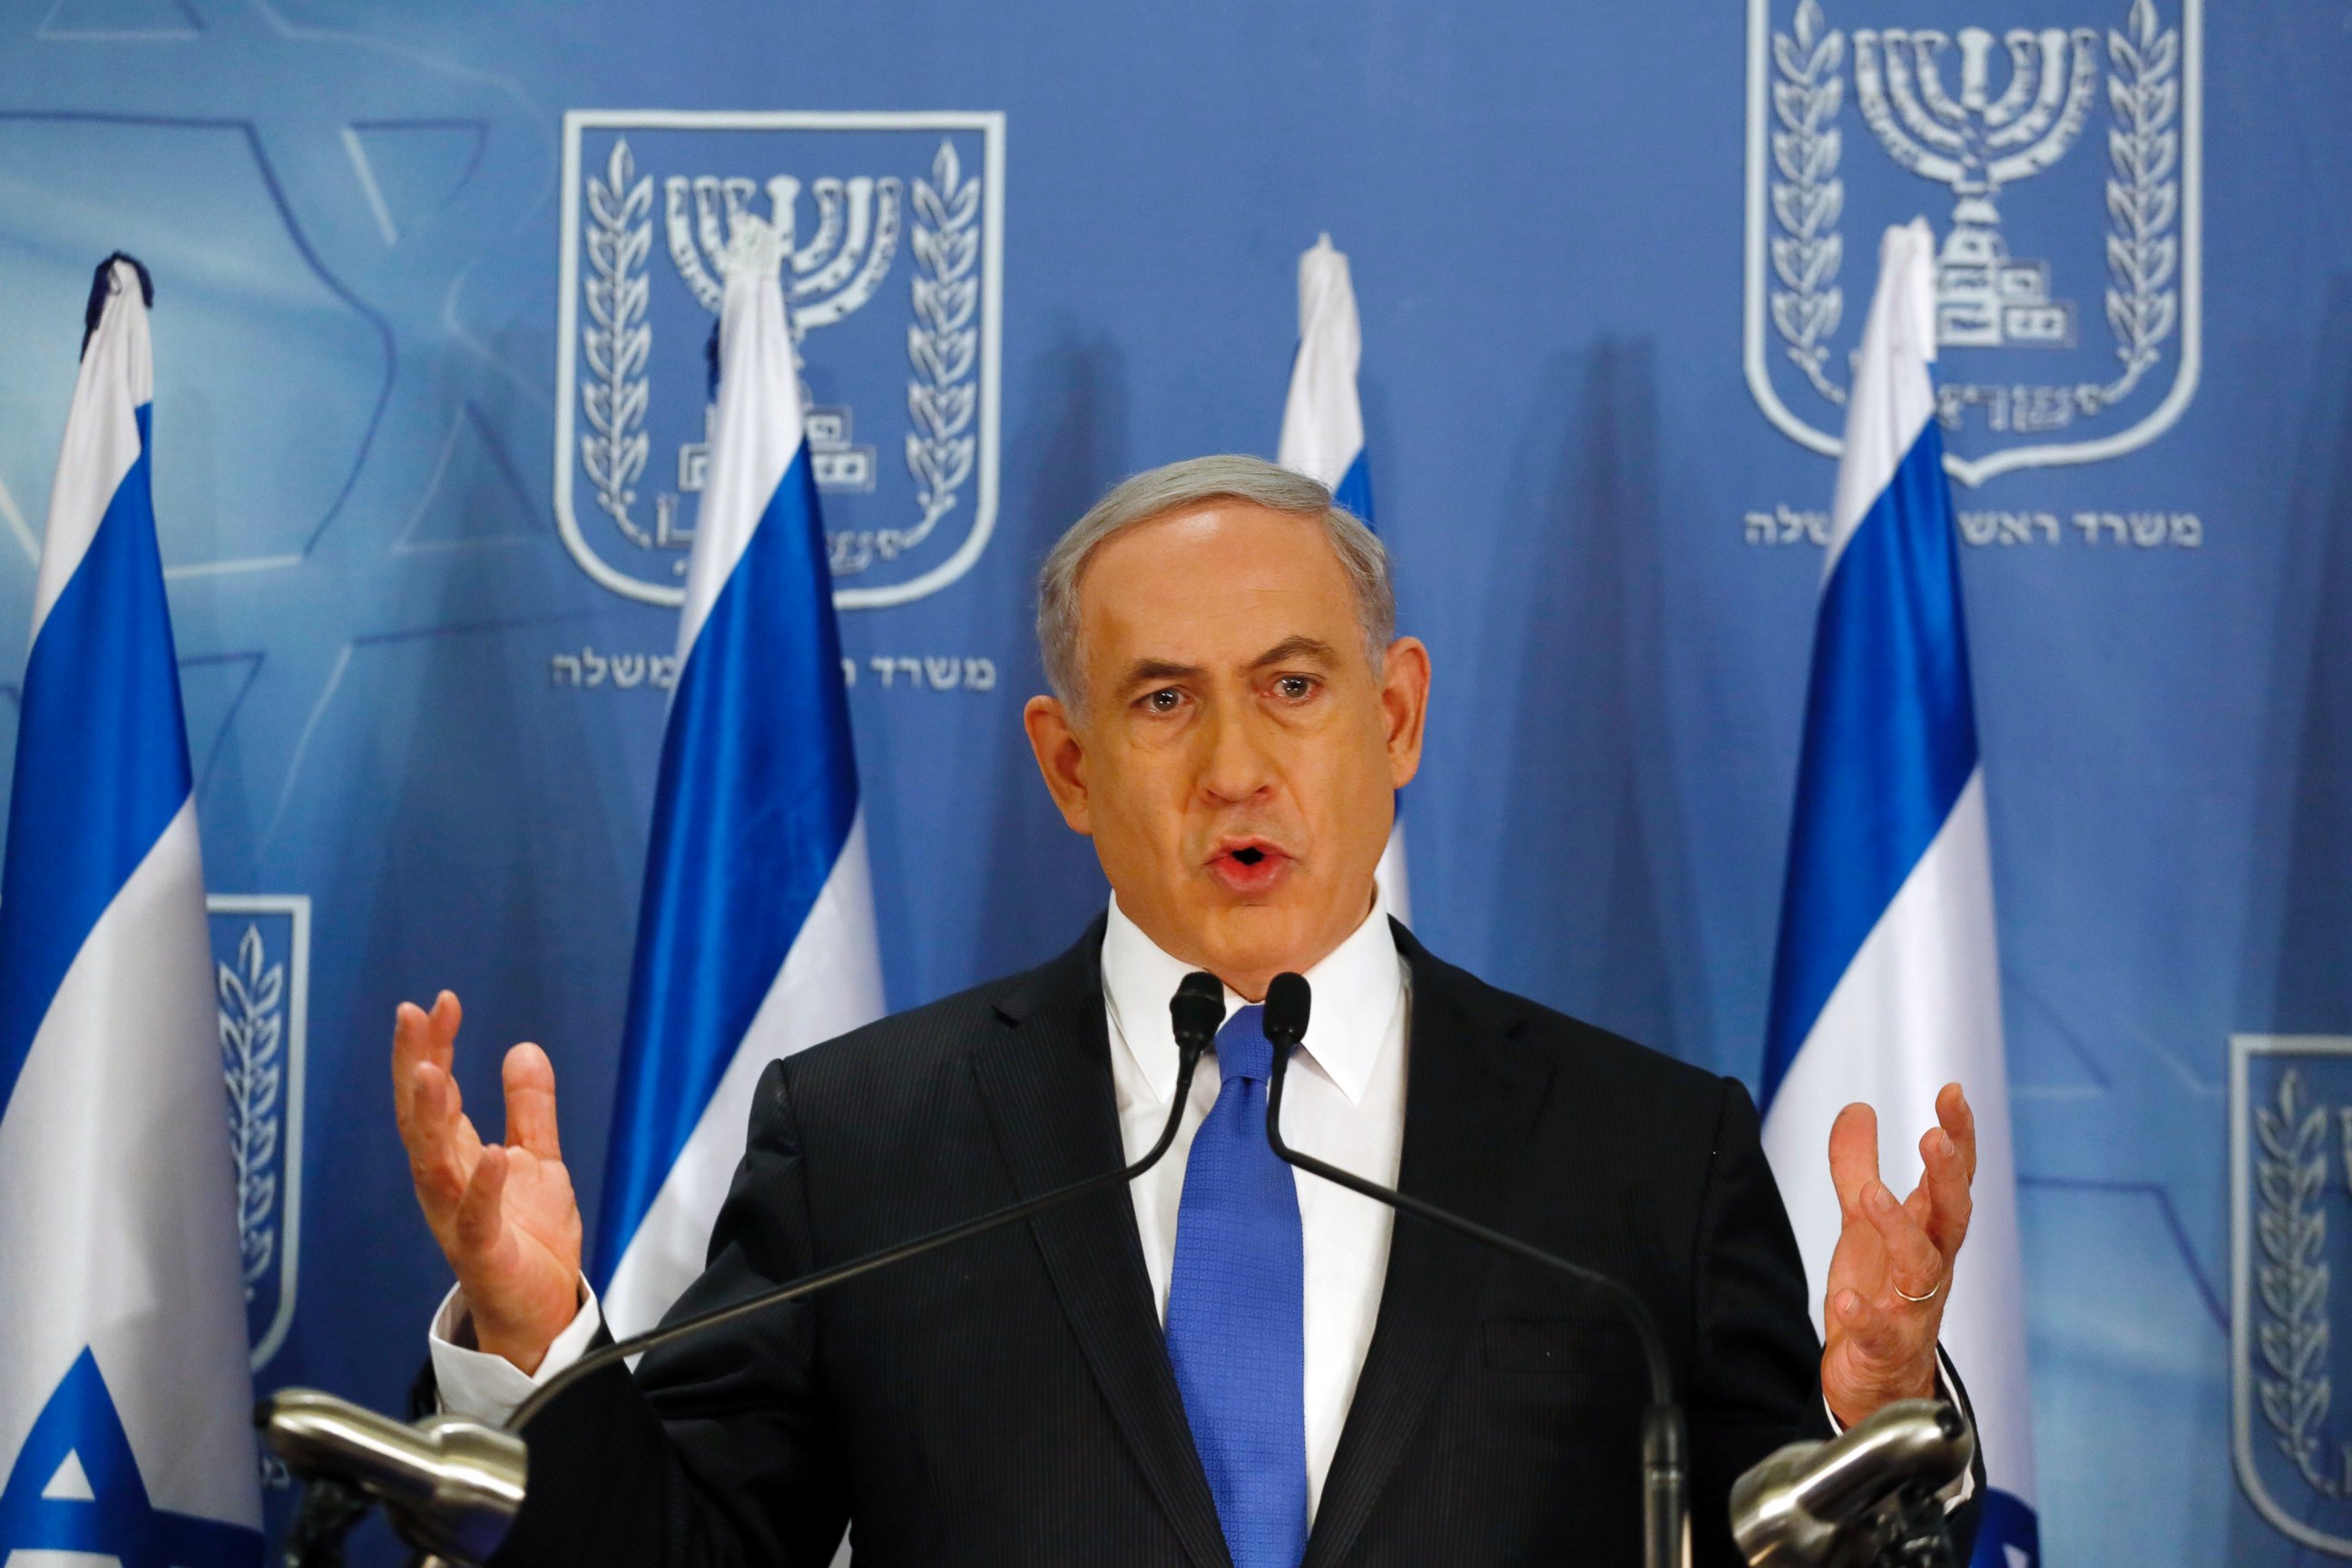 PHOTO: Israeli Prime Minister Benjamin Netanyahu gestures as he speaks during a press conference at the defense ministry in the Israeli coastal city of Tel Aviv on July 11, 2014. 